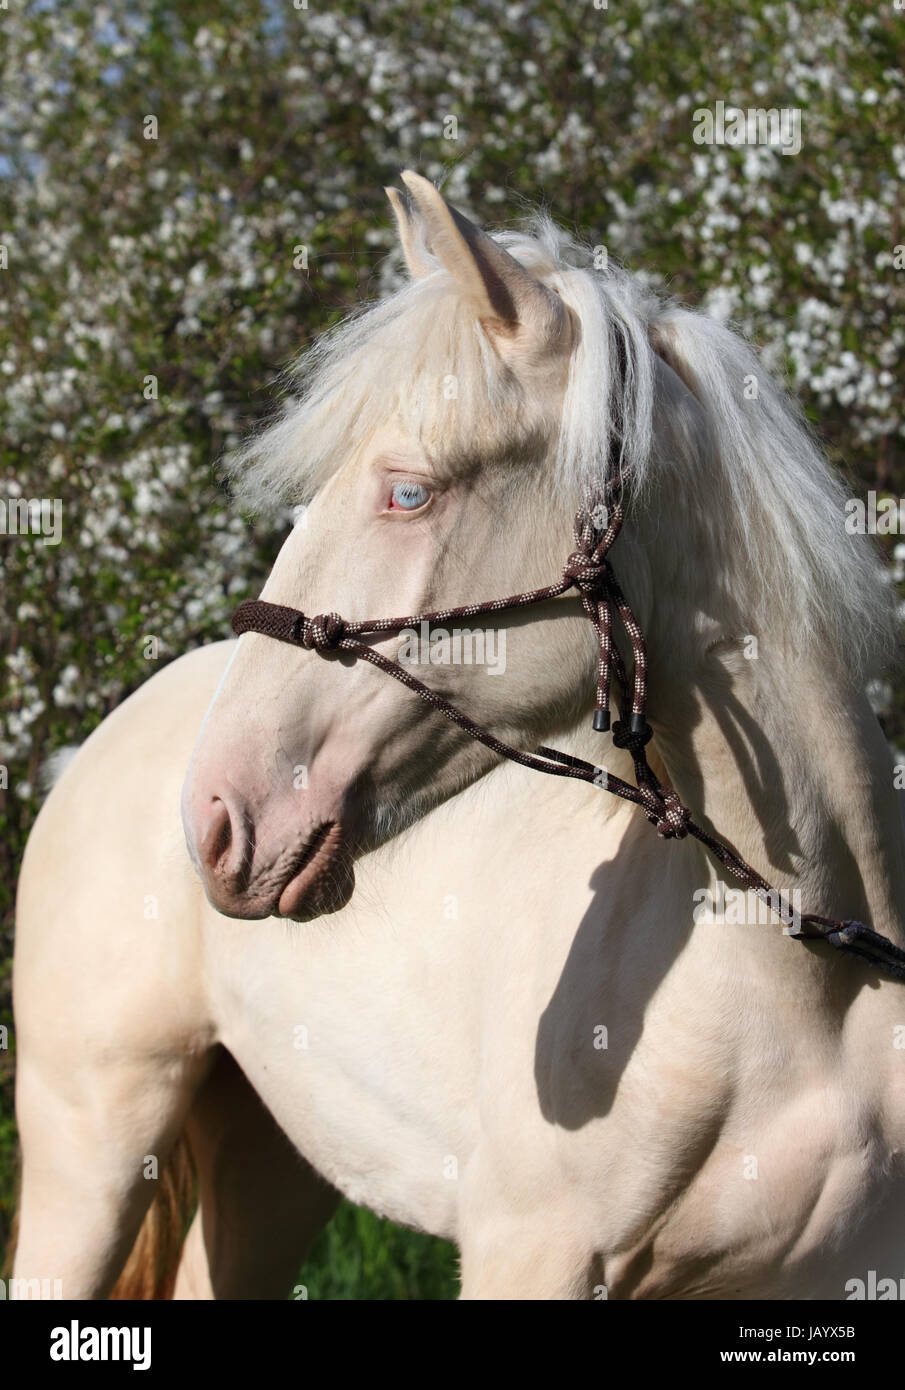 Funny Falabella pony au printemps blooming cherry garden Banque D'Images